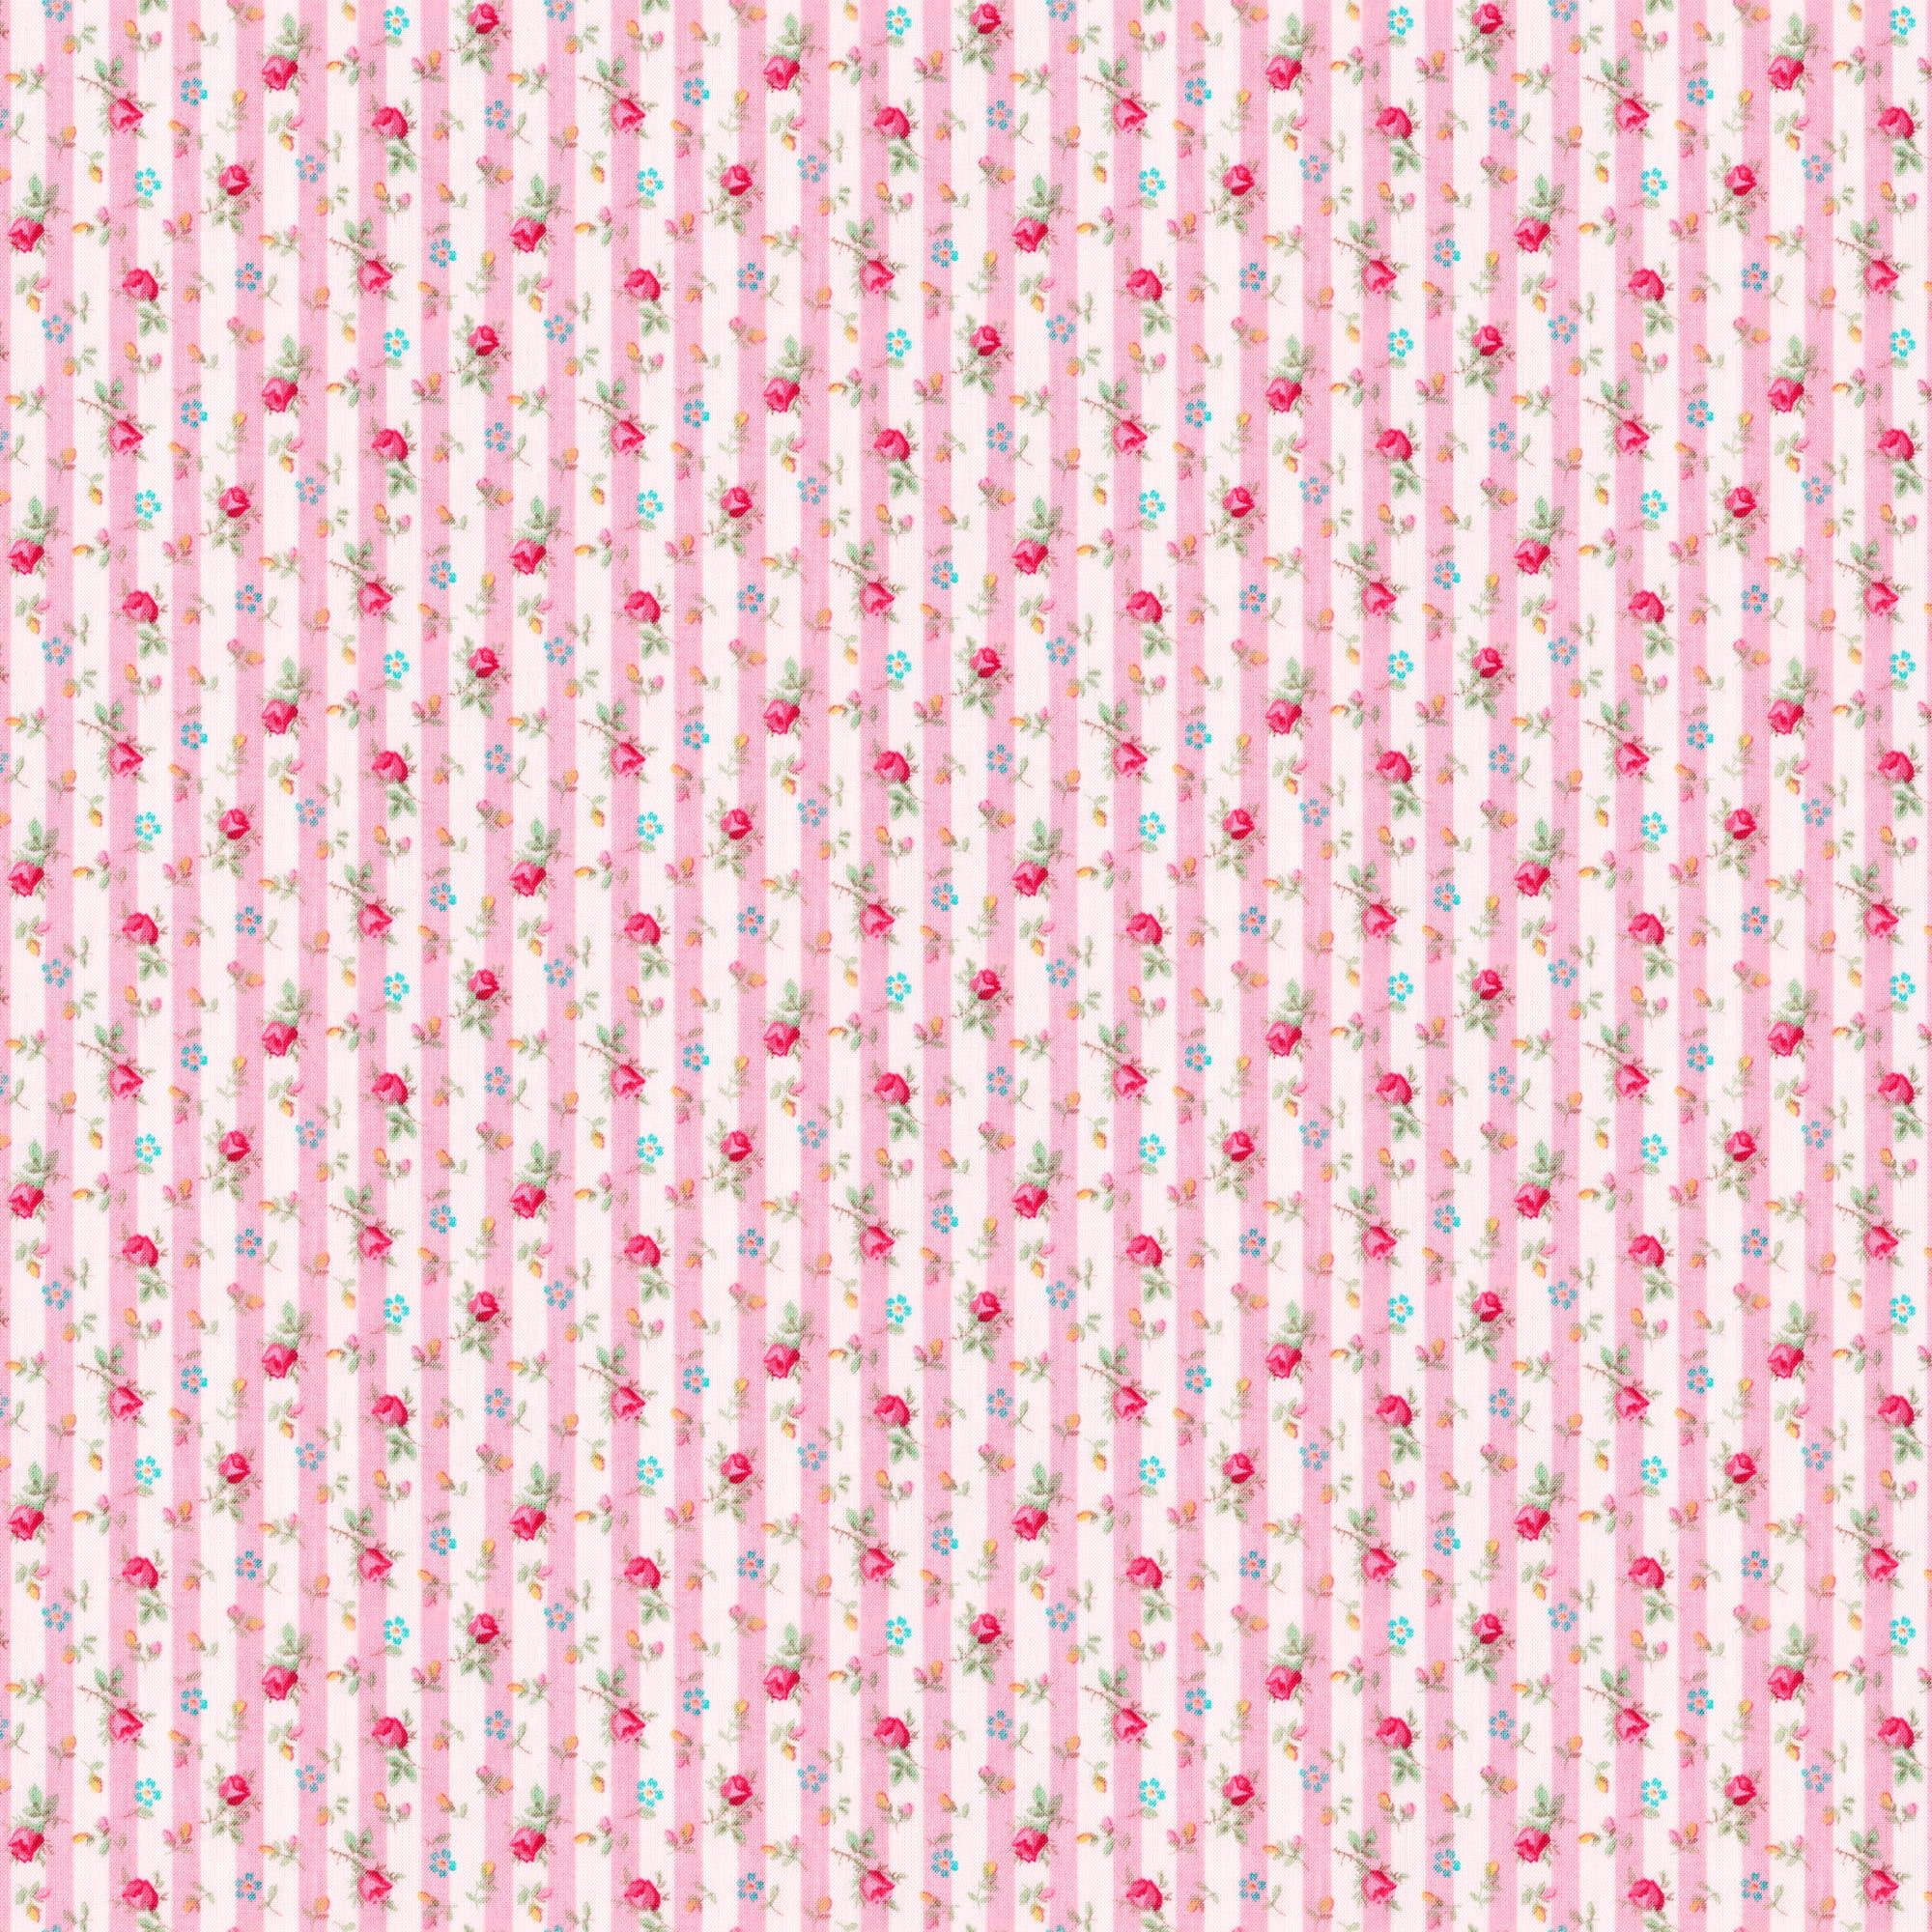 Crafting Fabric Cotton Fabric Flower Quilting Fabric Flower Fabric Fabric By-The-Yard Flower Fabric By-The-Yard